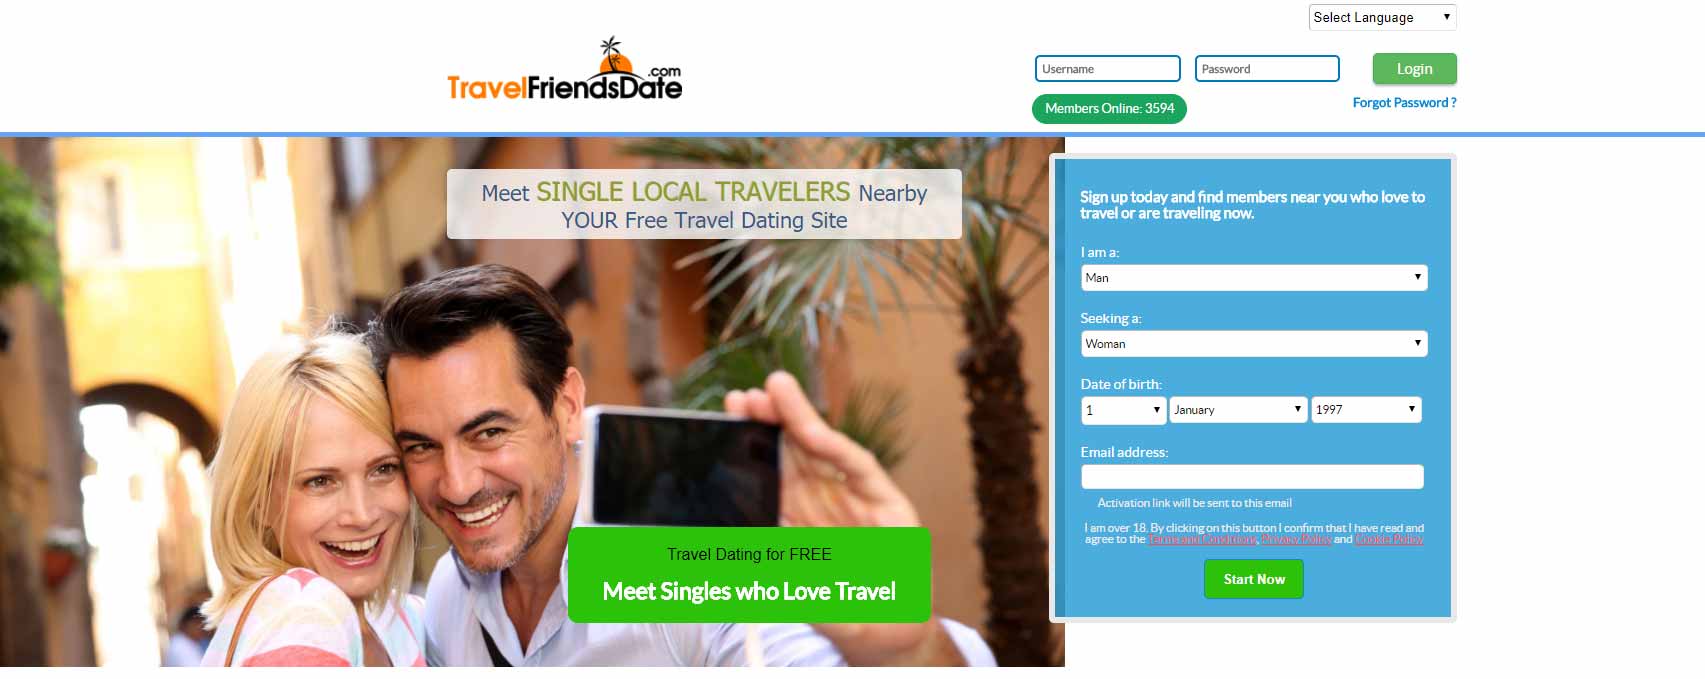 Travel Friends Date home page image for international travel and dating site review